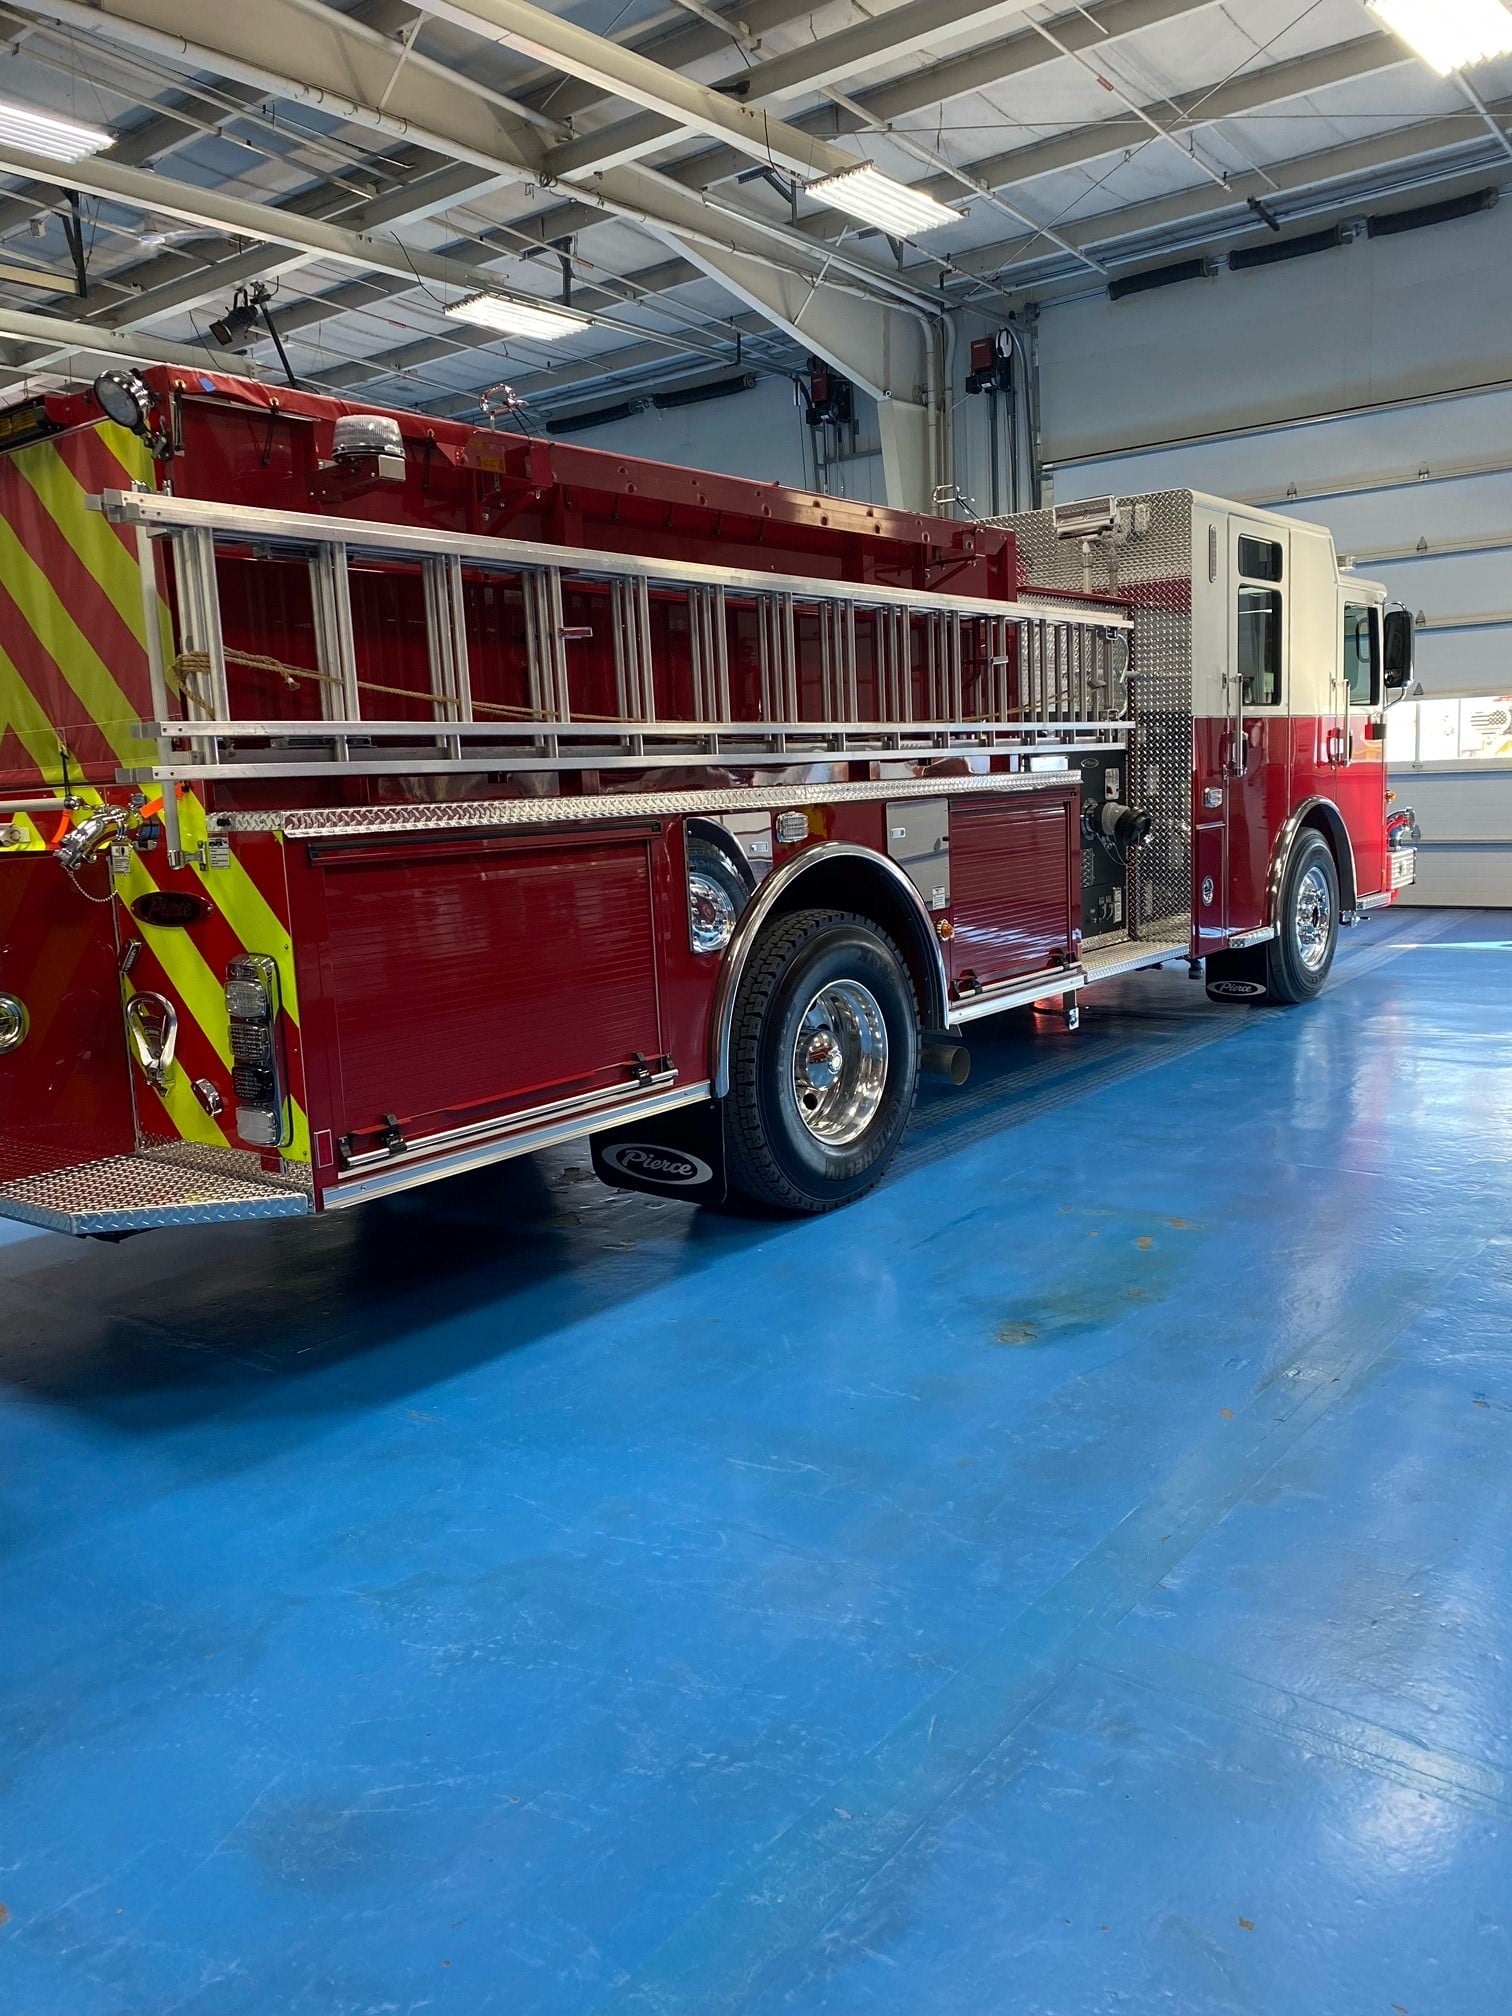 Tour the Fire Truck, Meet Chief Rob Gaylor and See Sparky the Fire Dog